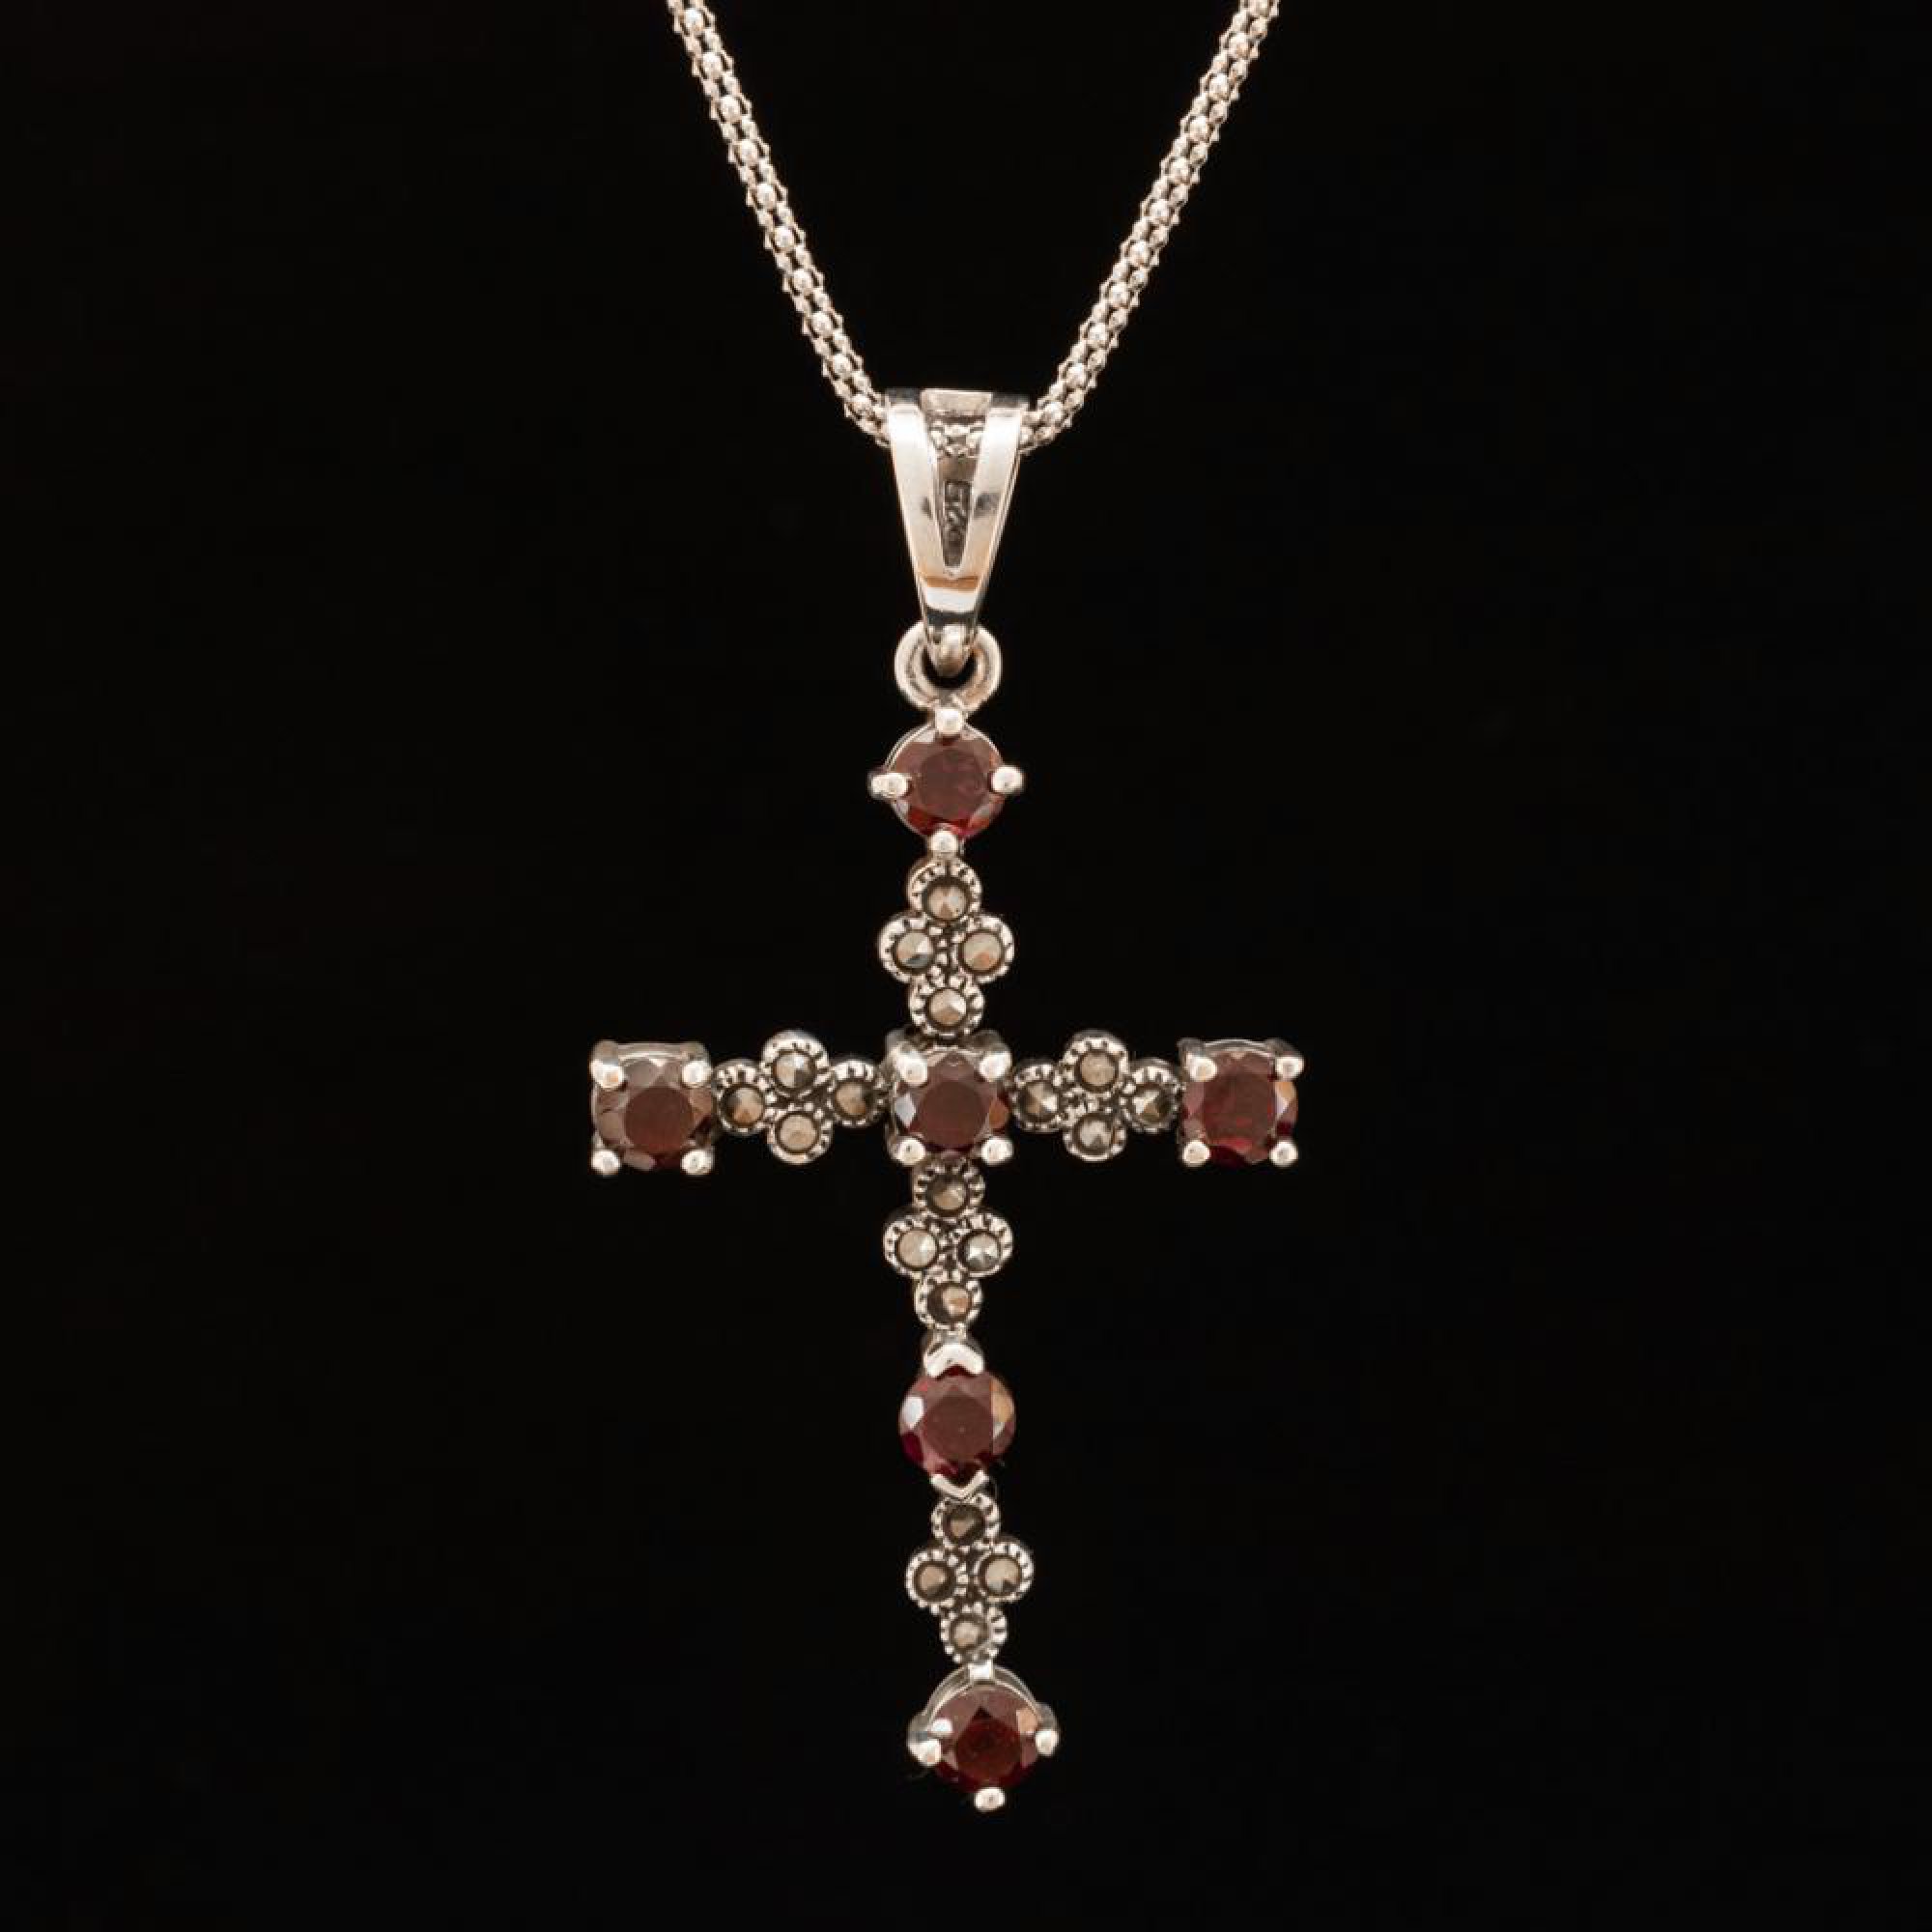 Silver cross with garnet stones and marcasites